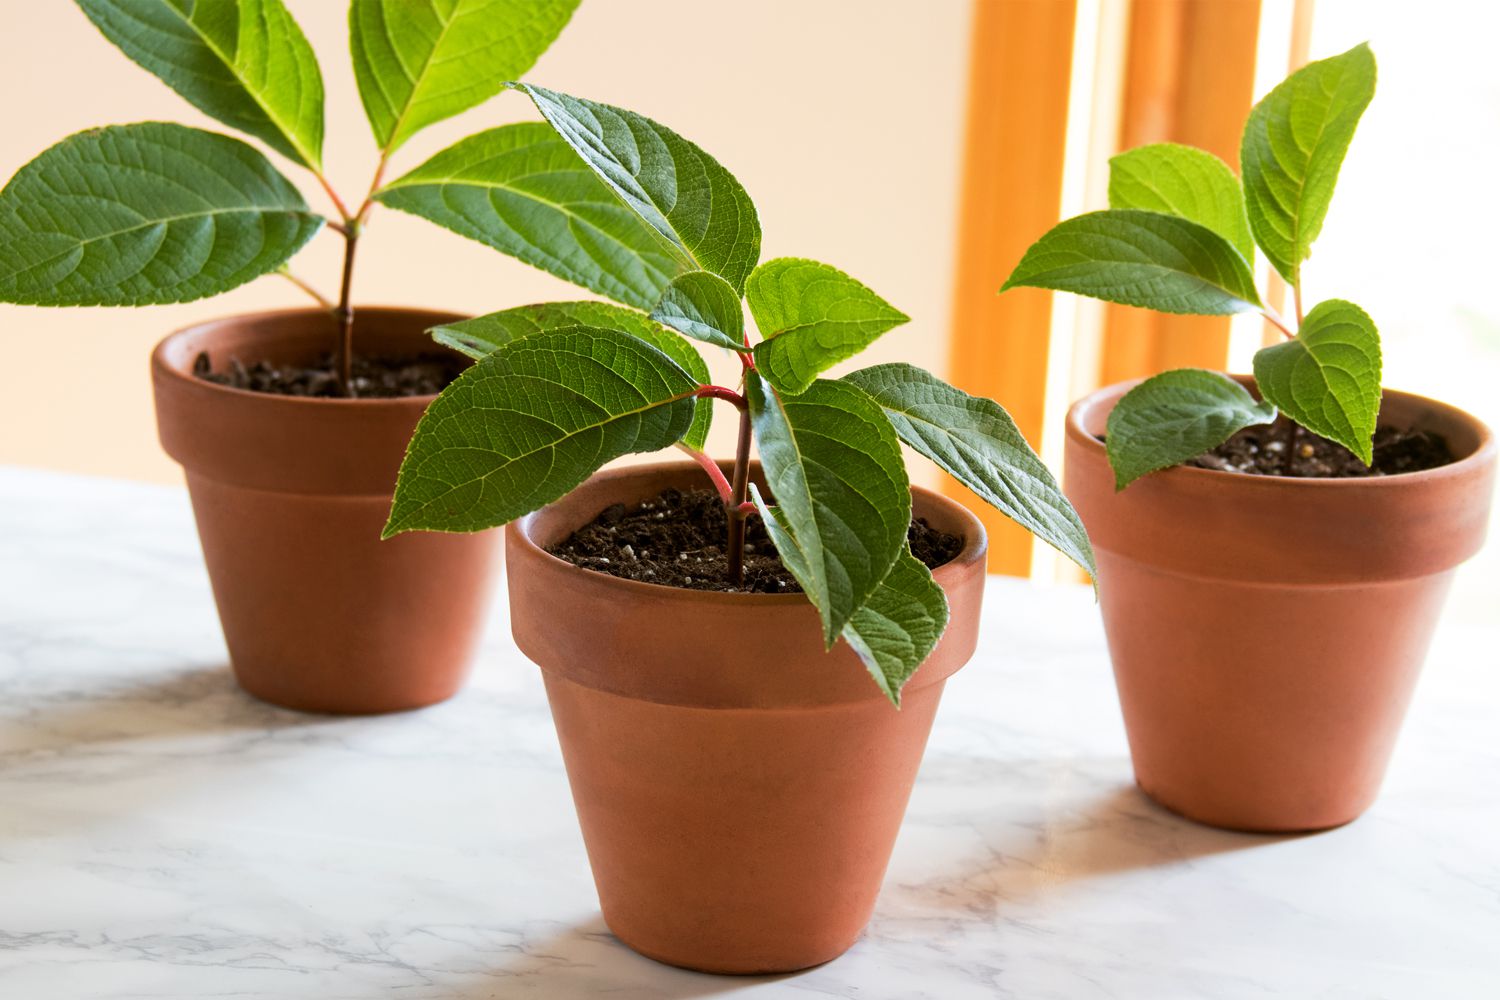 Growing Plants from Your Groceries